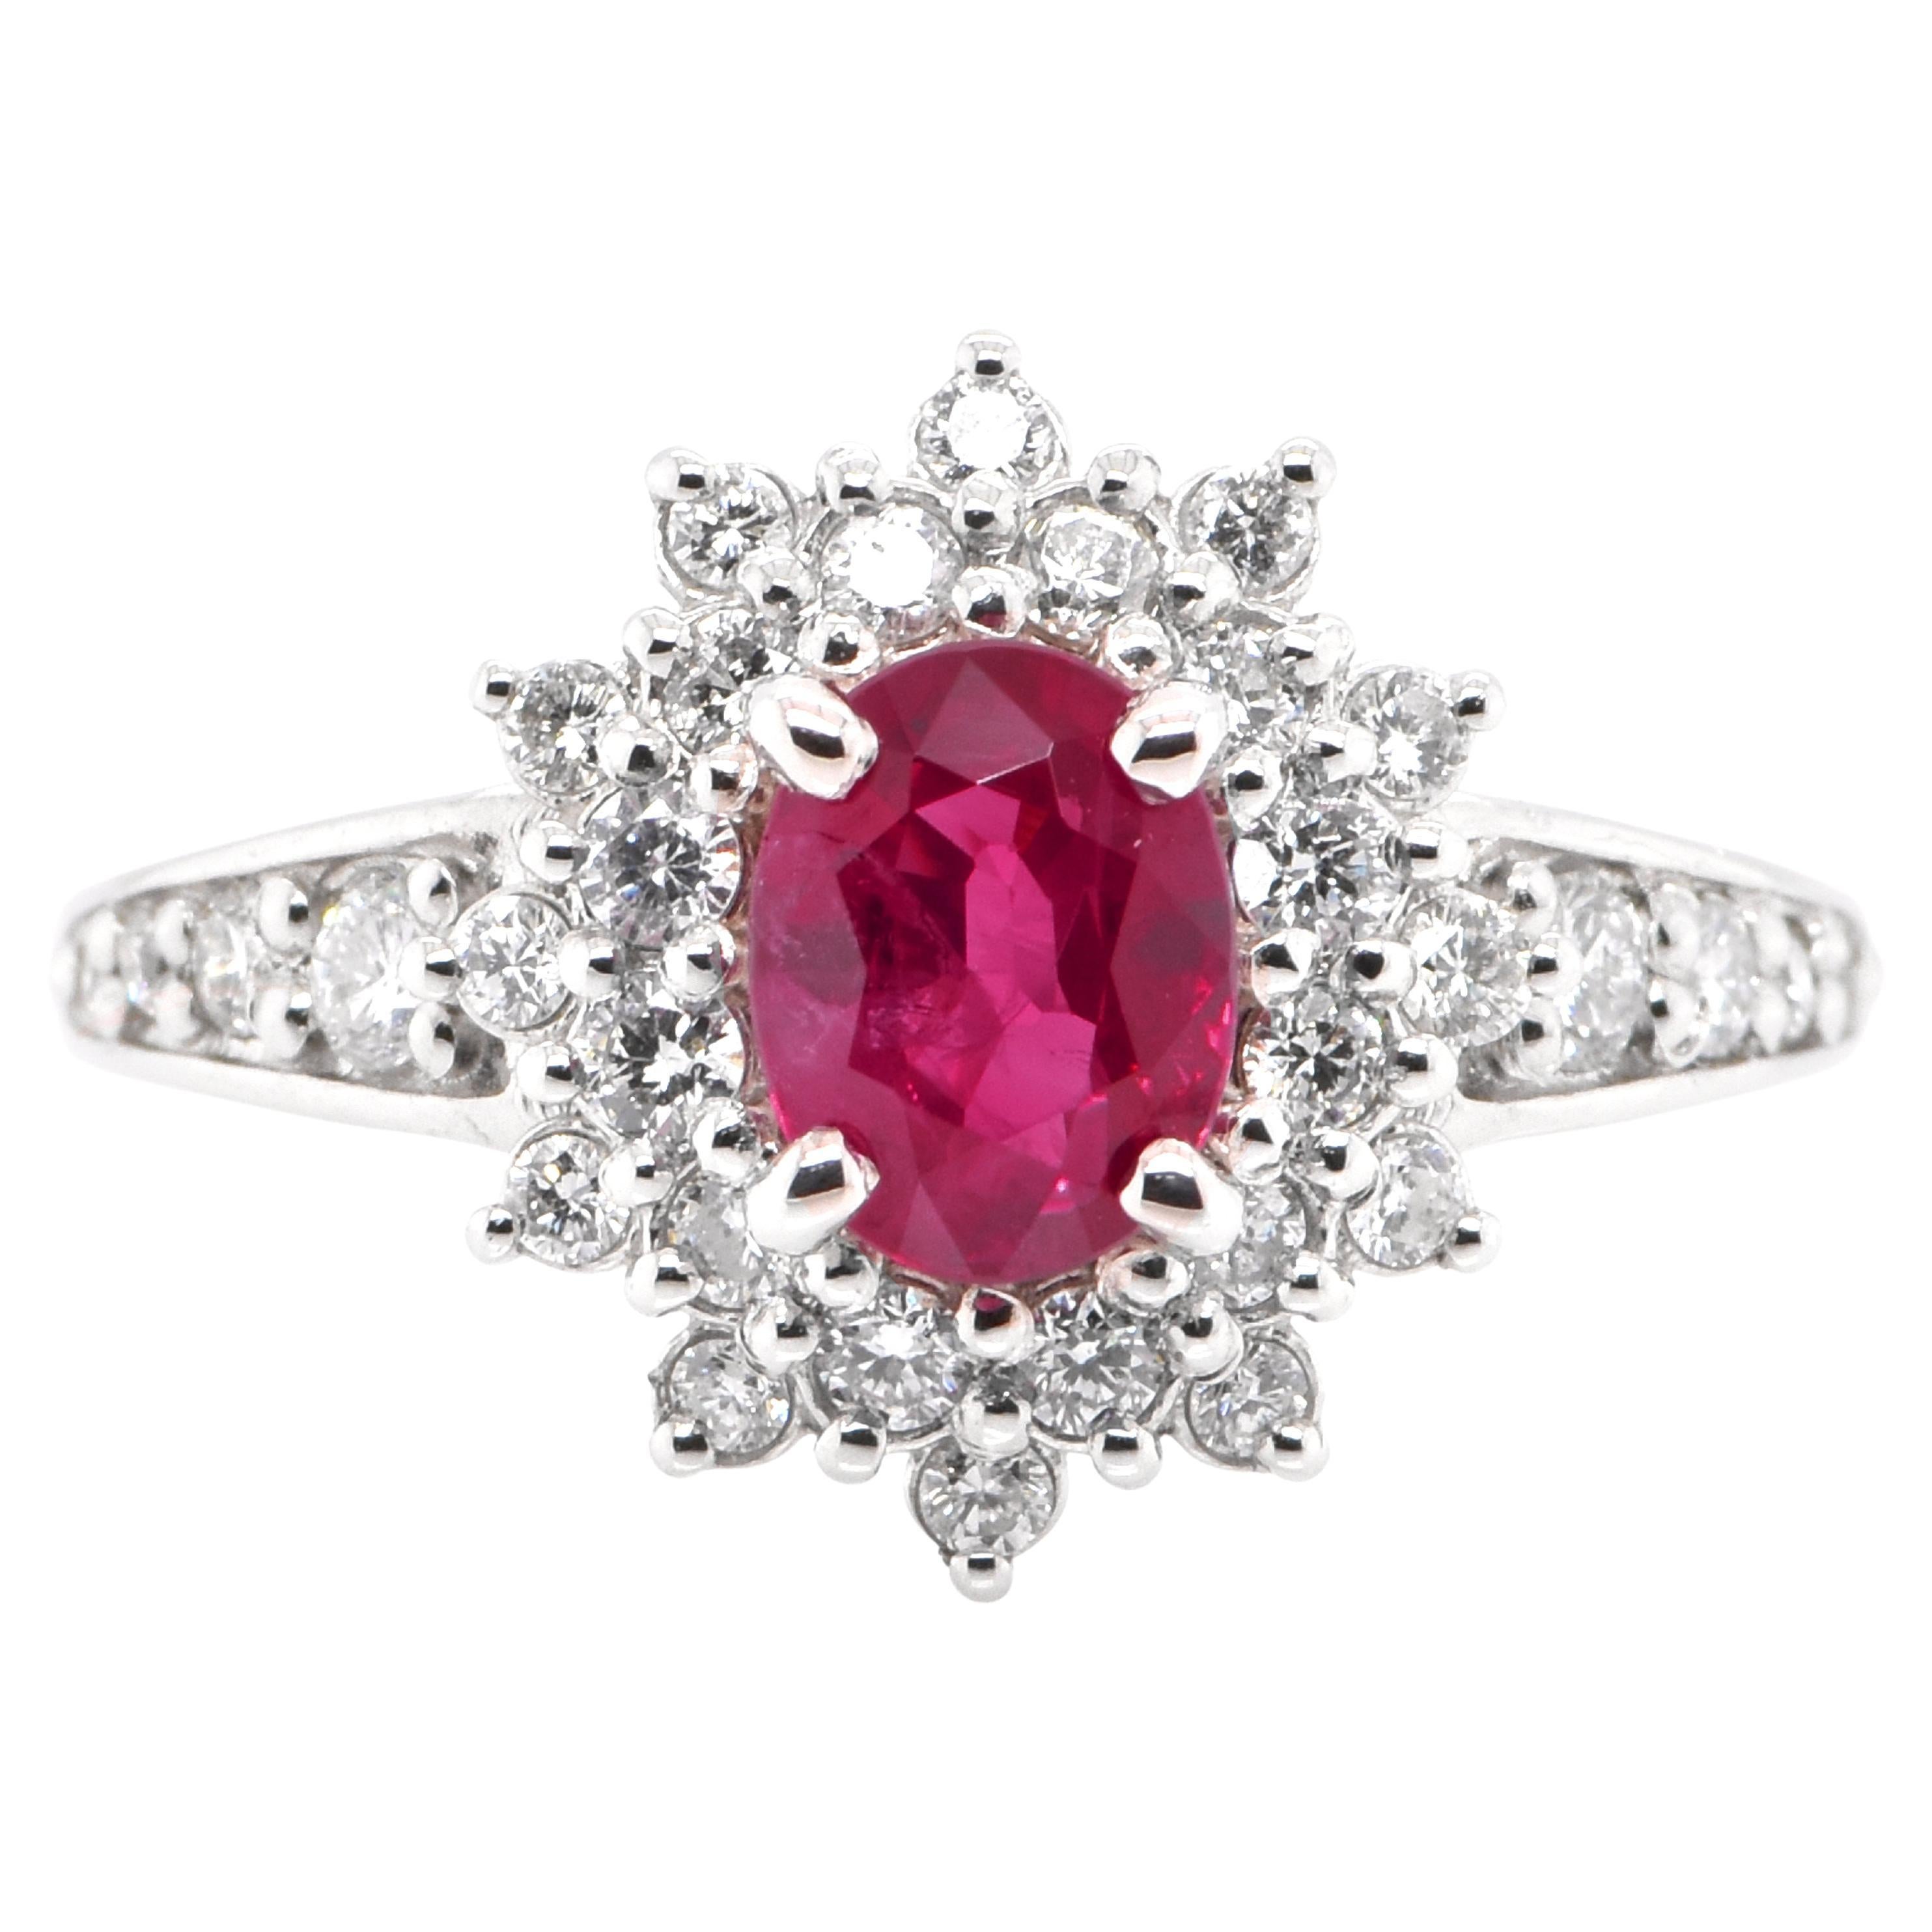 1.15 Carat Natural Ruby and Diamond Double Halo Ring Set in Platinum